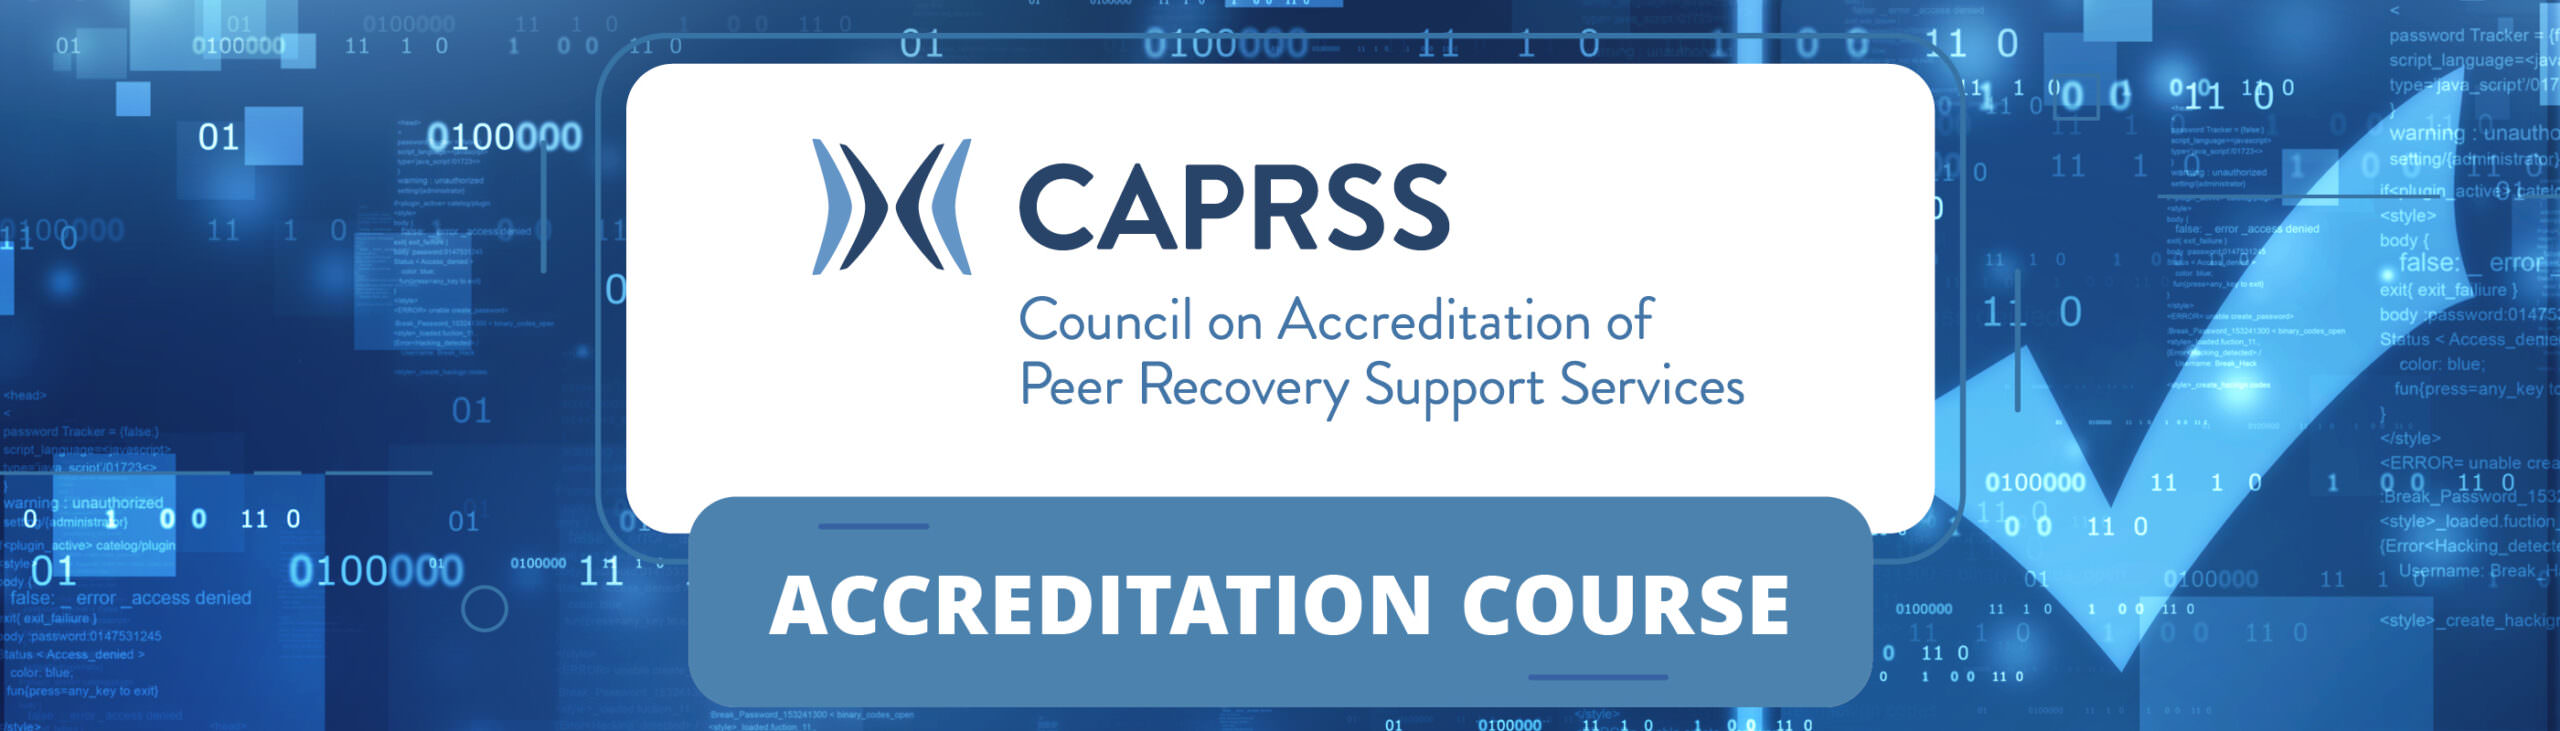 CAPRSS Accreditation featured image for events calendar